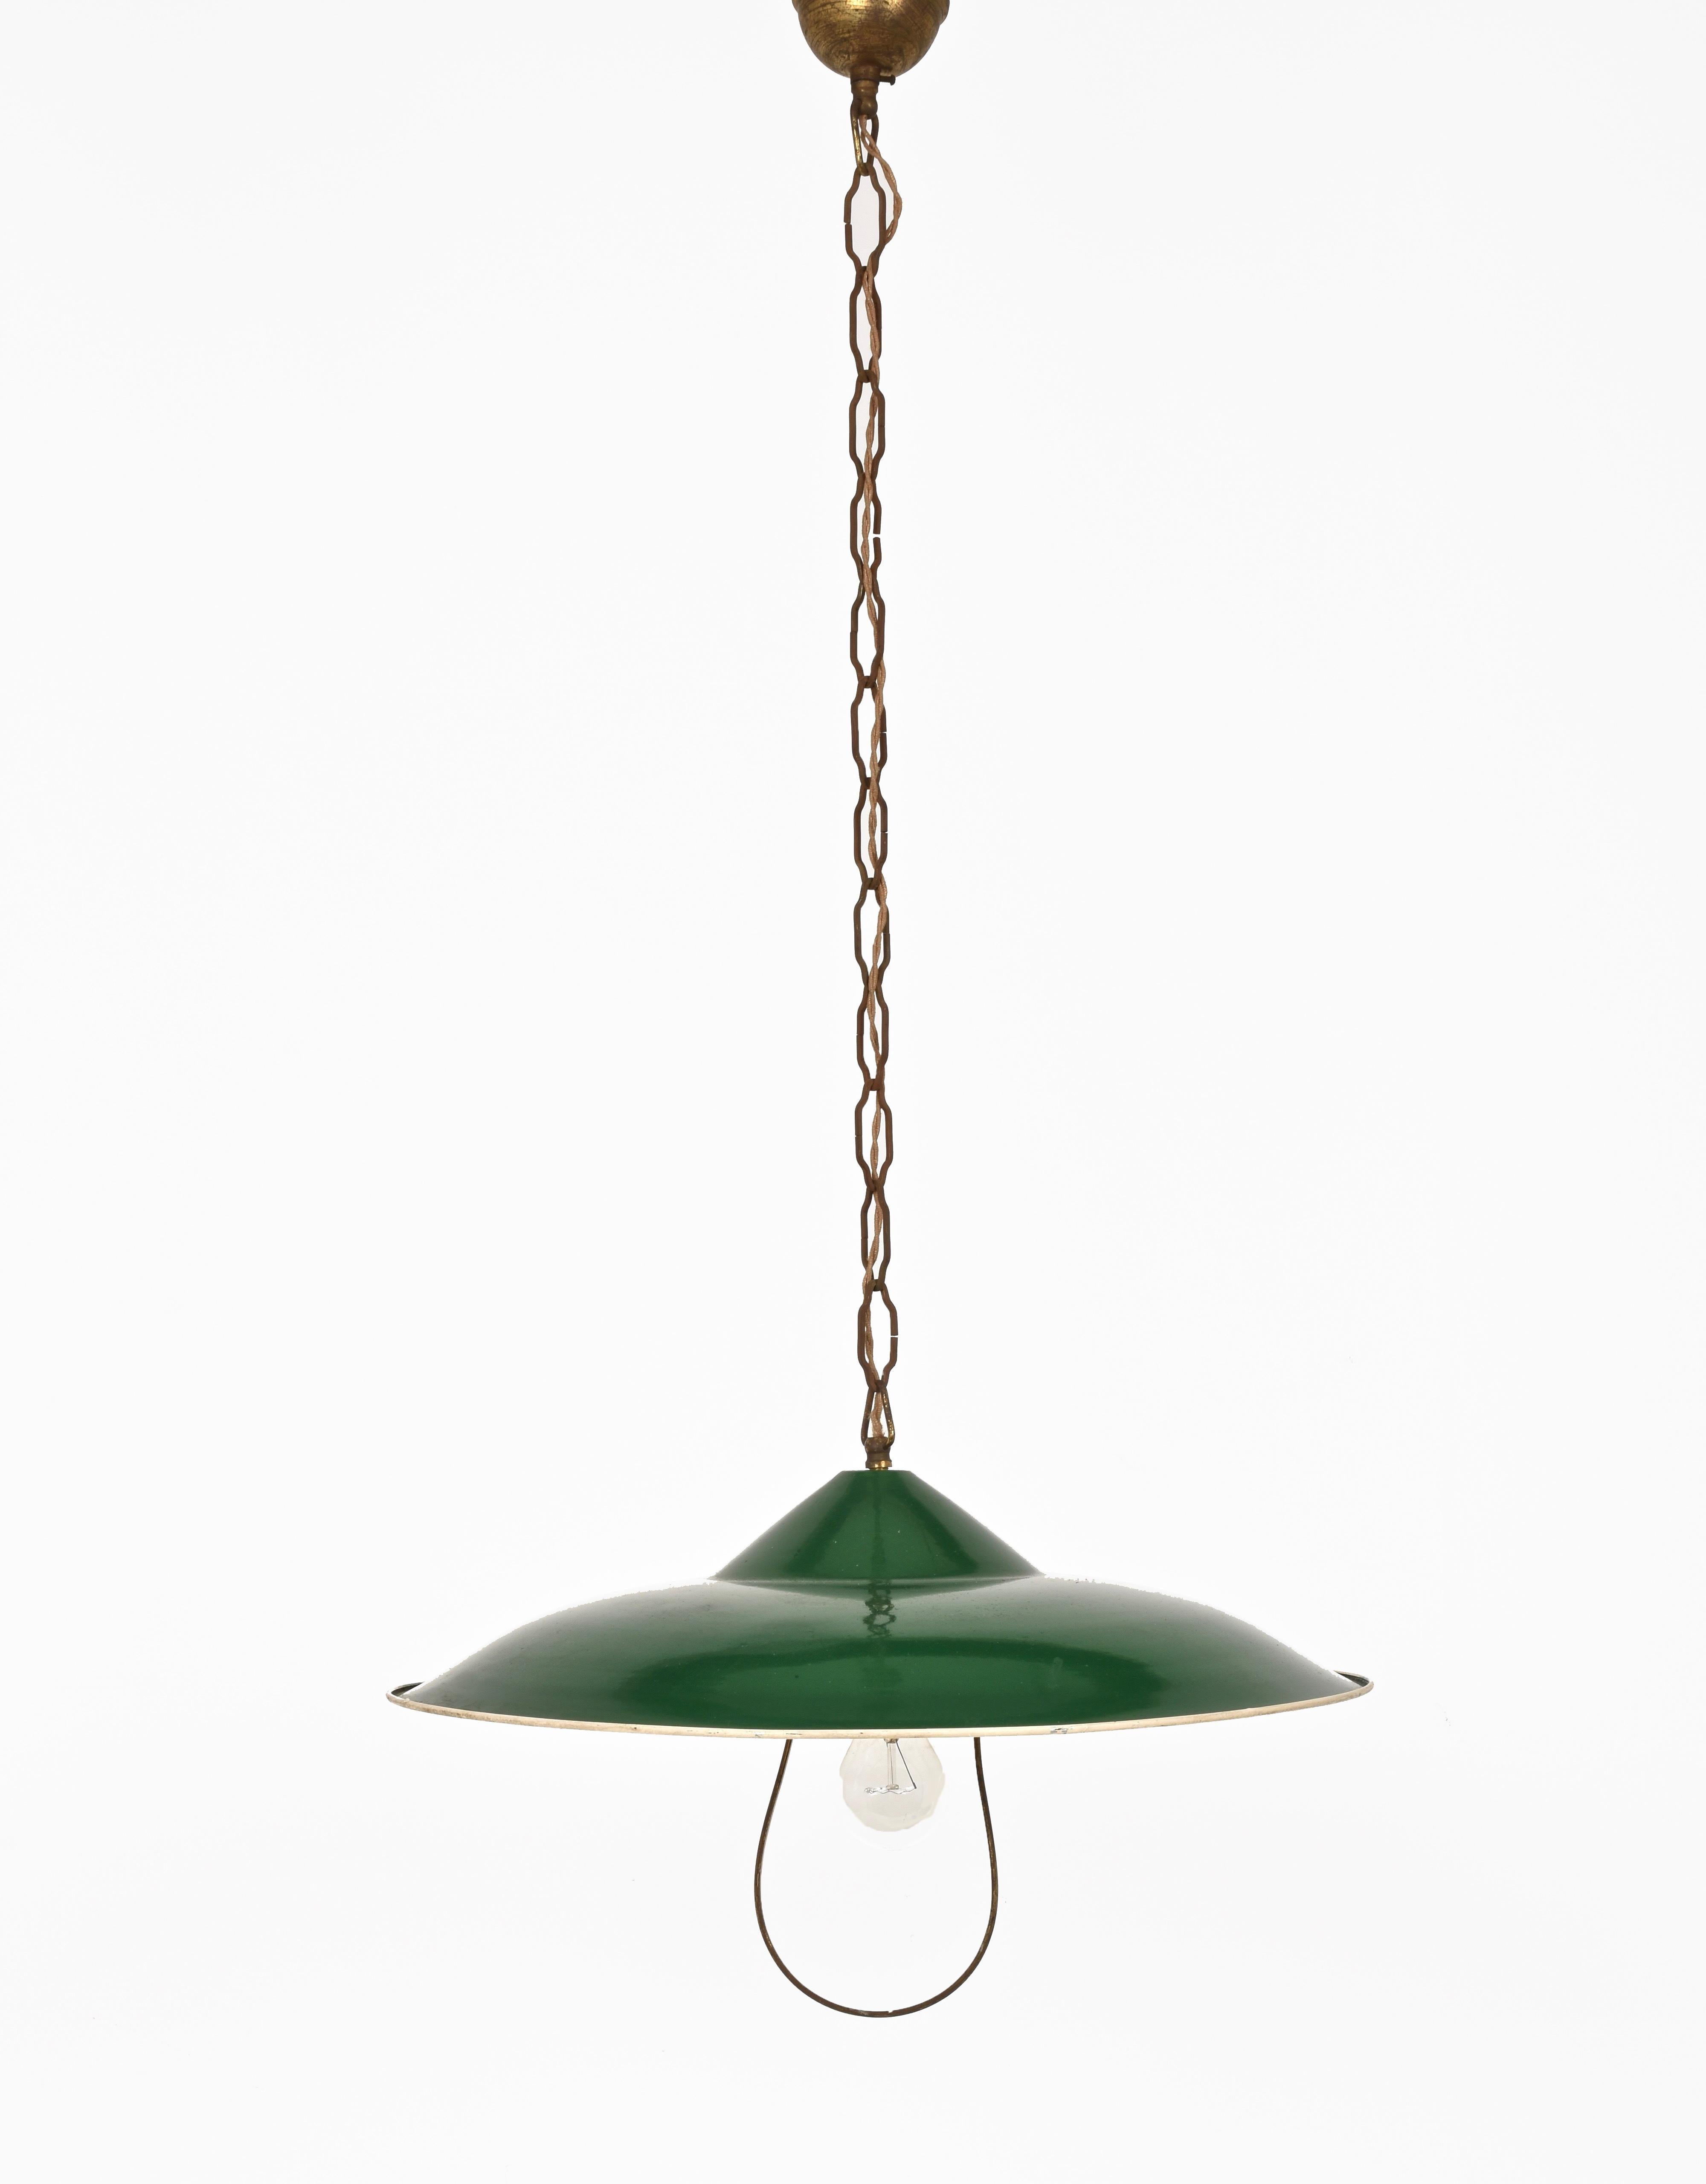 Chandelier in green glazed metal. Pendant Italy, Industrial style of the 1950s.